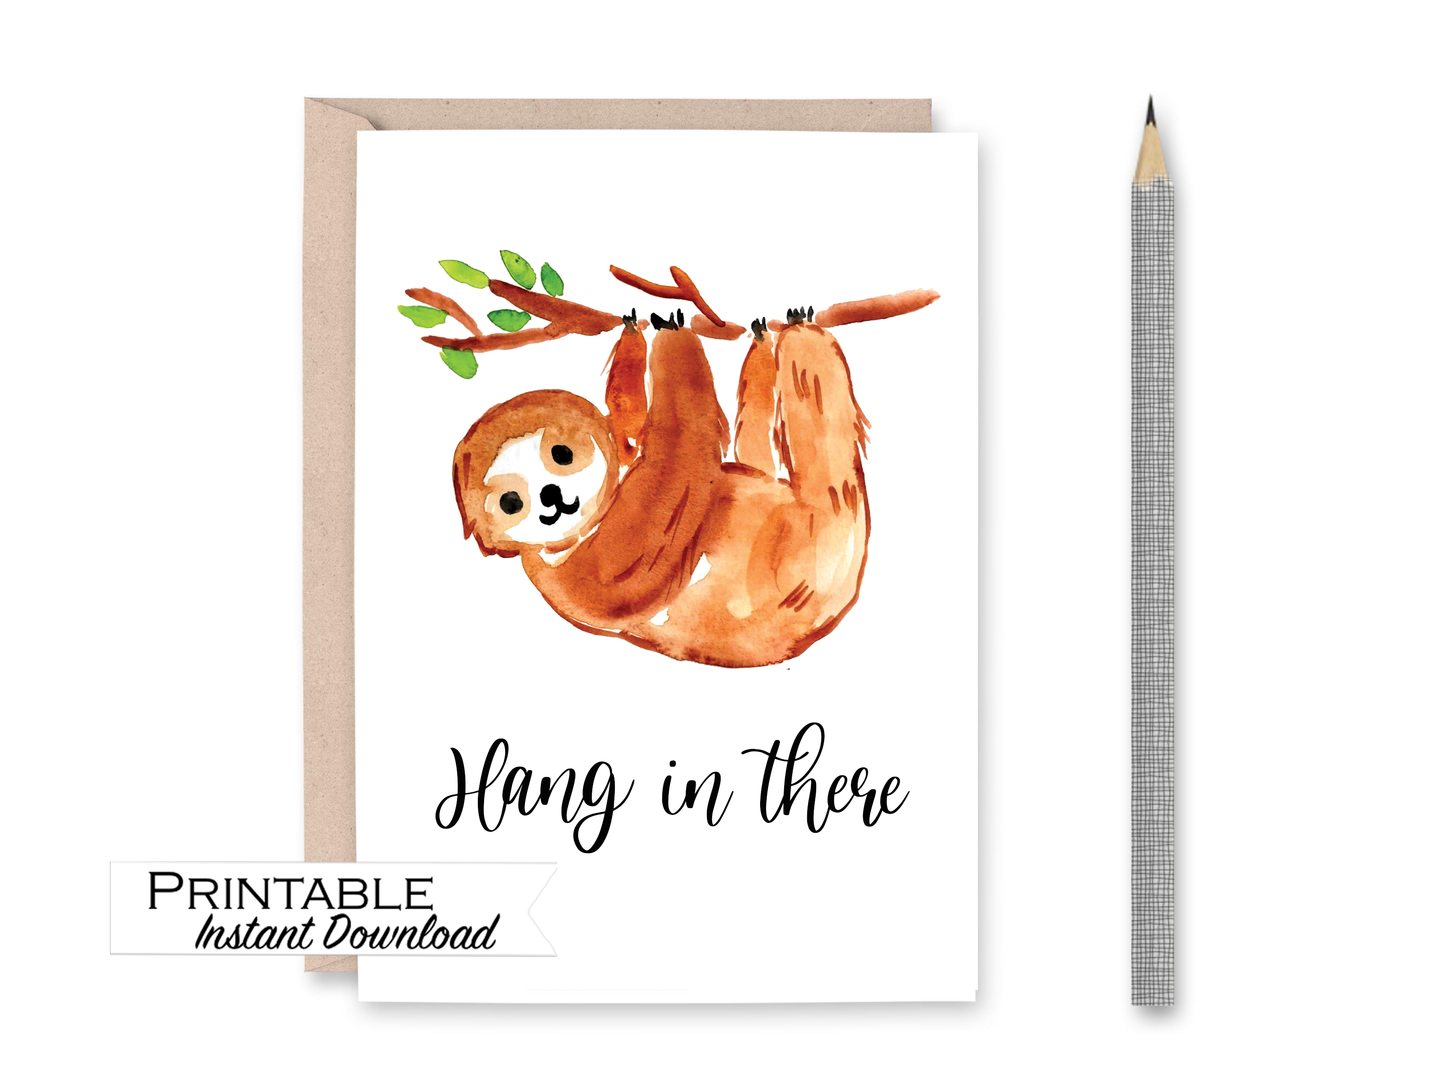 Sloth Hang in there Encouragement Card Printable - Digital Download